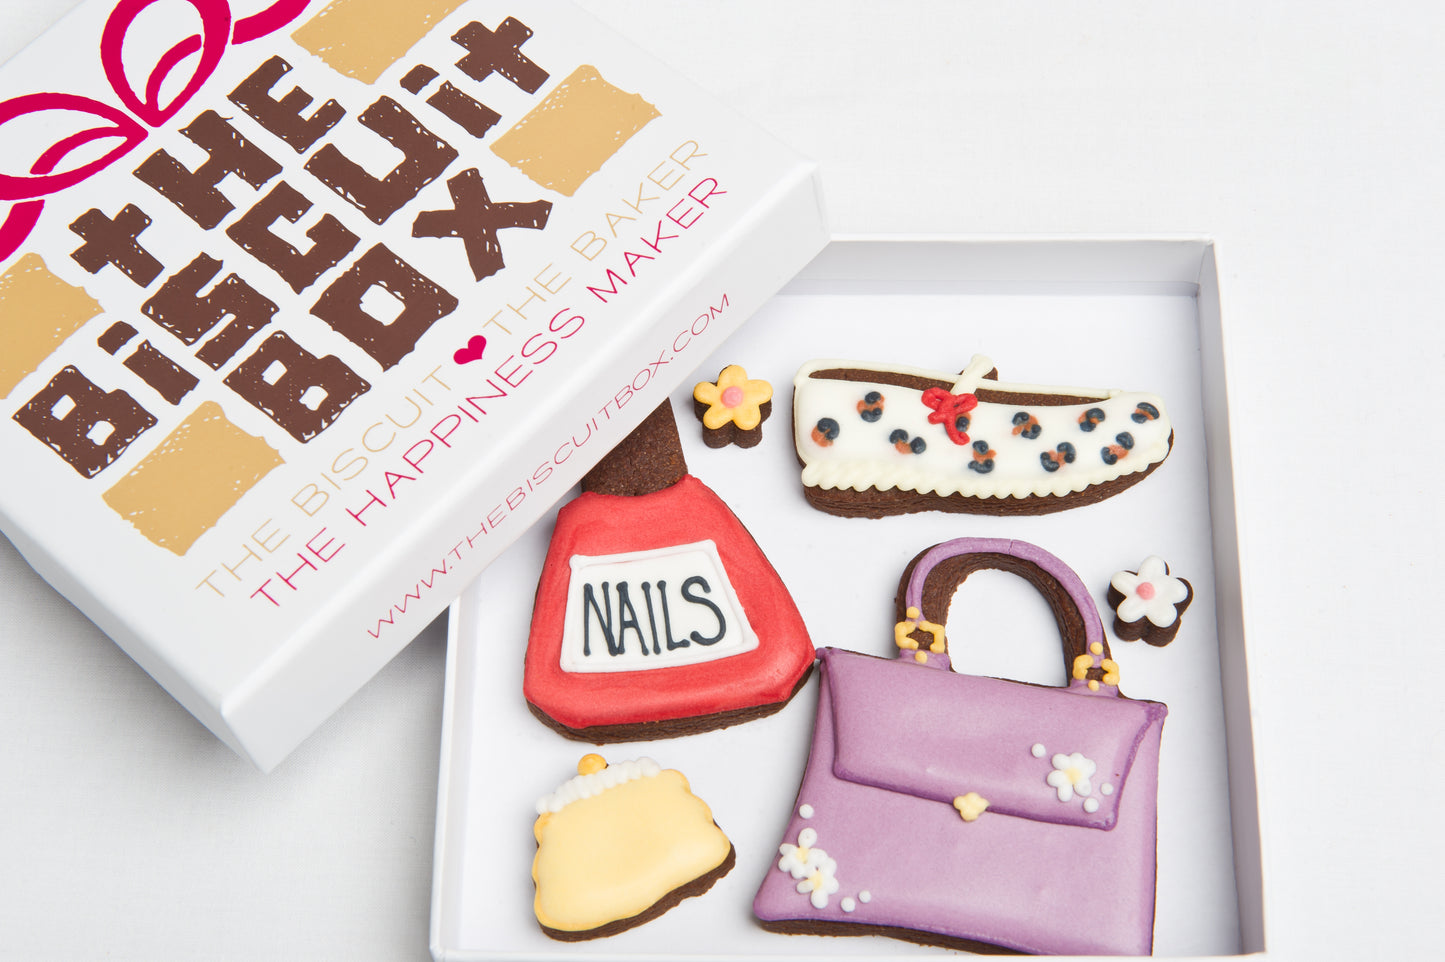 fashion cookies in a box. Handbag biscuits and show biscuits with mini iced hearts in a box to fit through the letterbox.